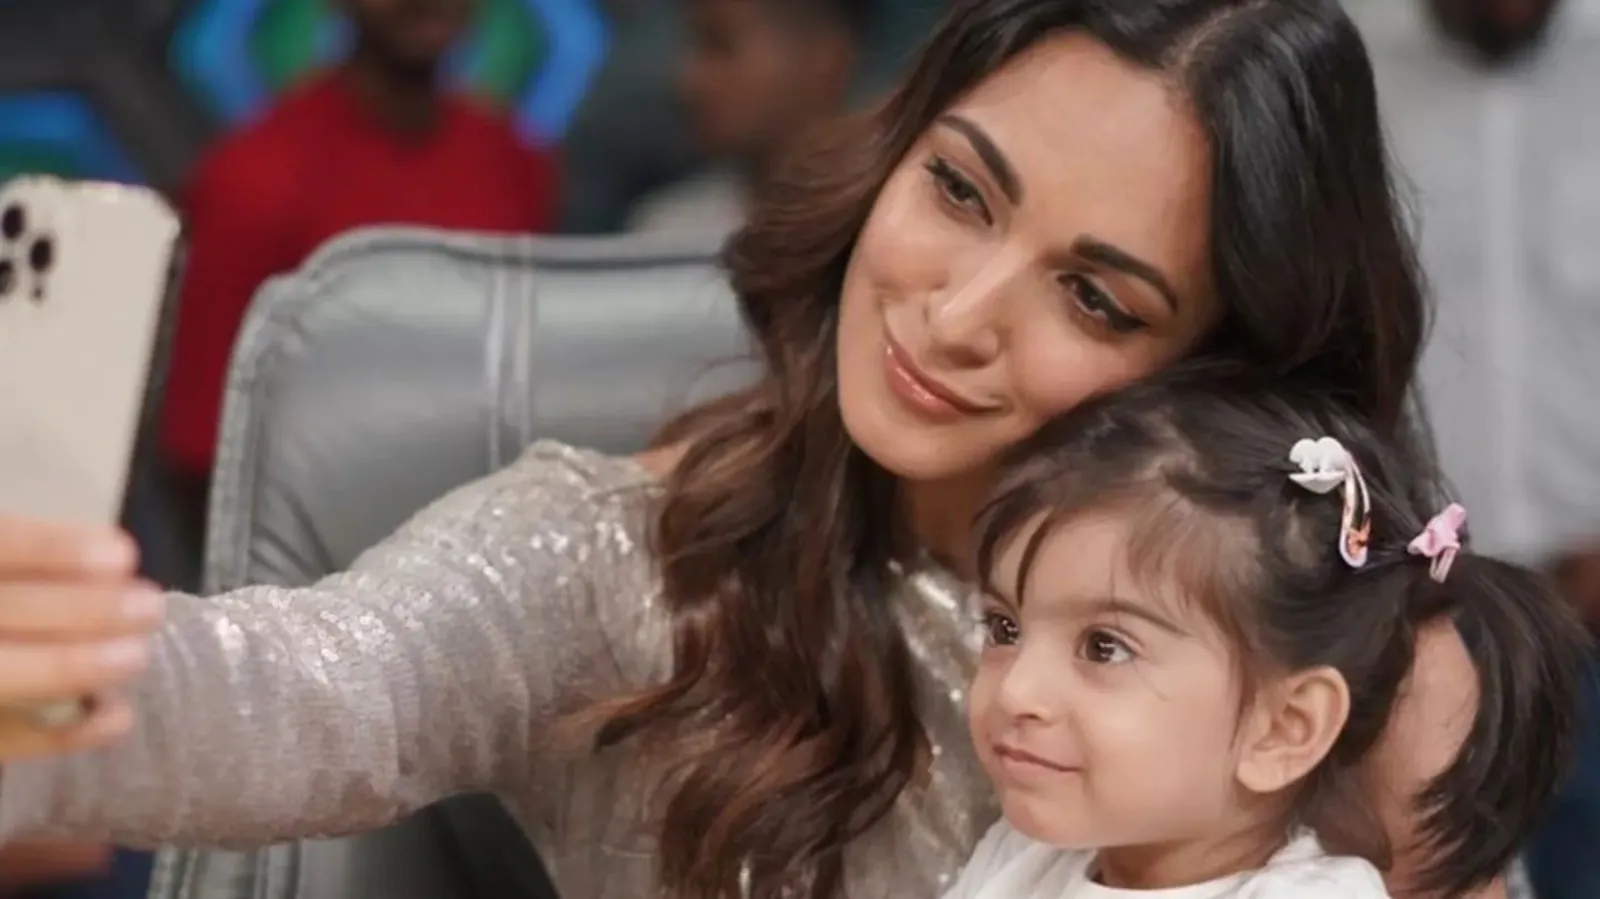 Kiara Advani poses with Jay Bhanushali’s daughter Tara, says she watches her videos when she feels low. See pics